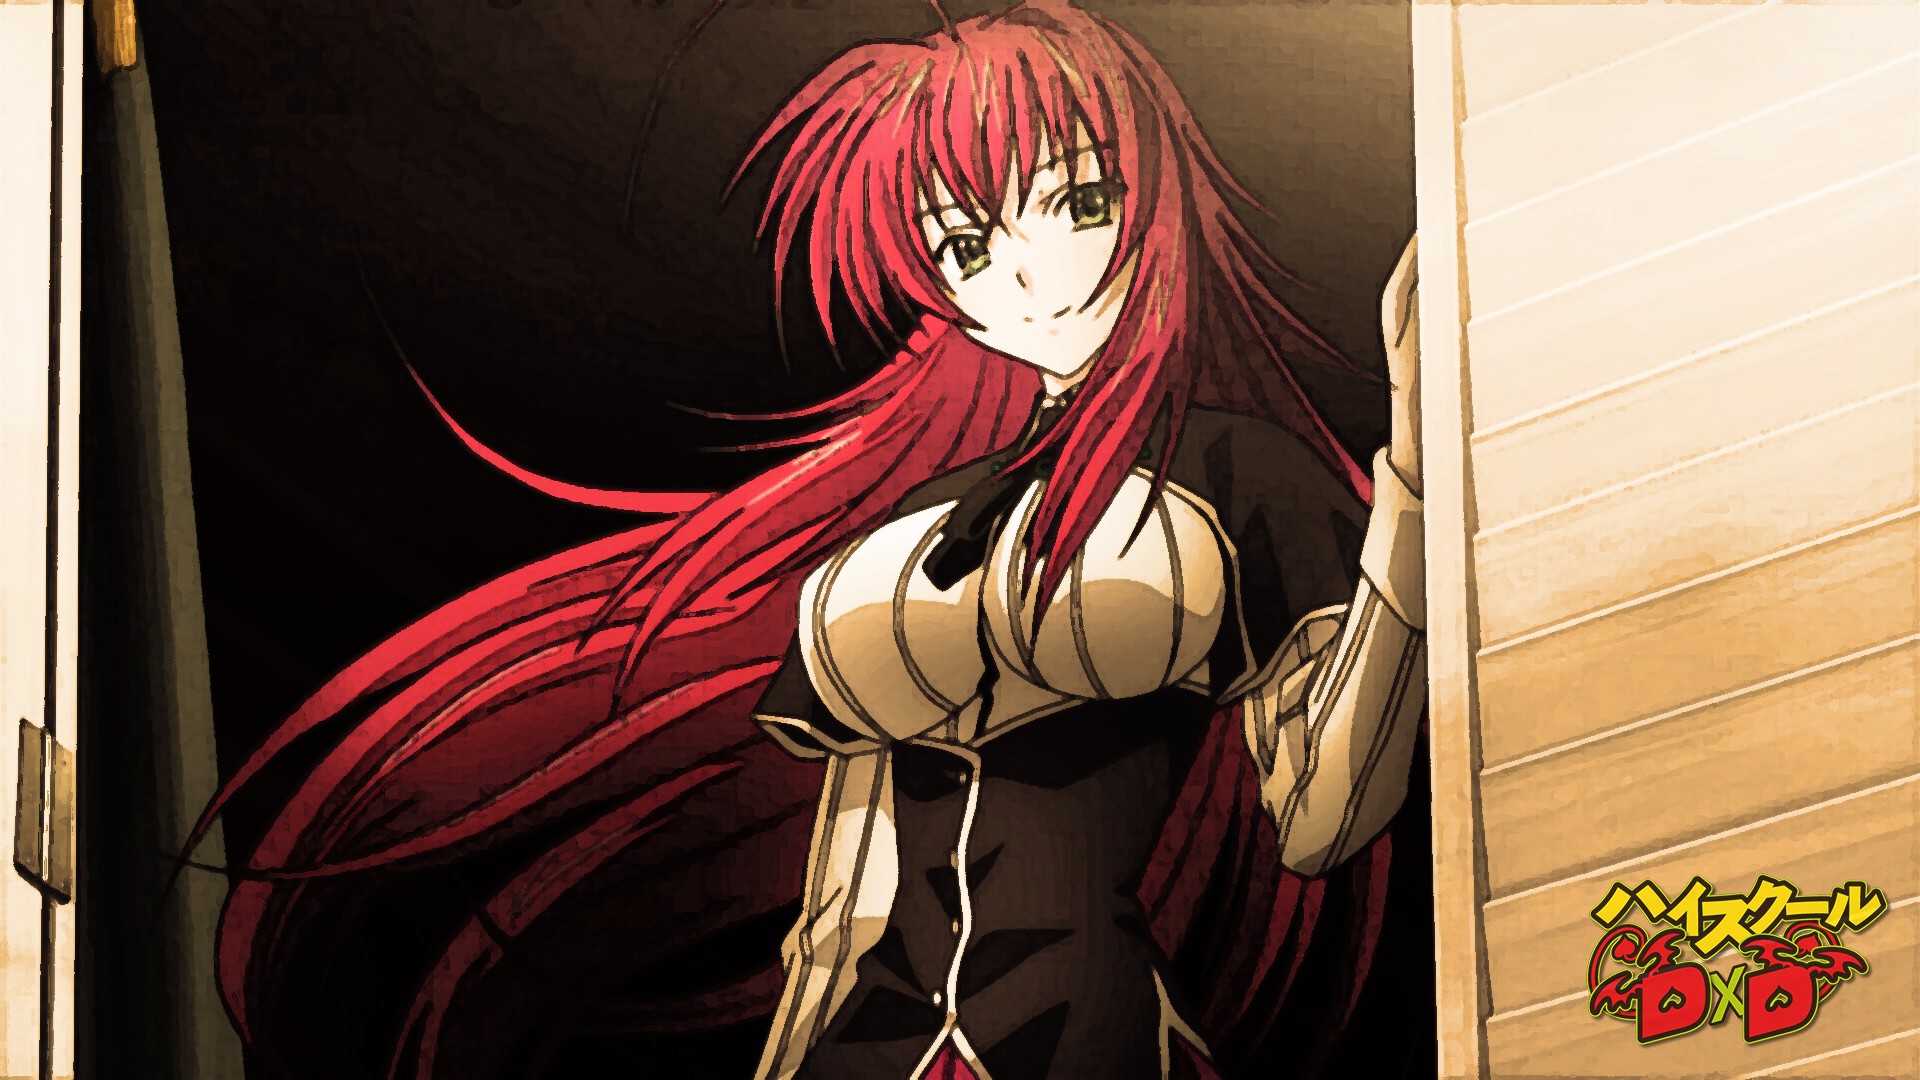 Gremory Rias Gremory Rias Red Red Red 1920x1080